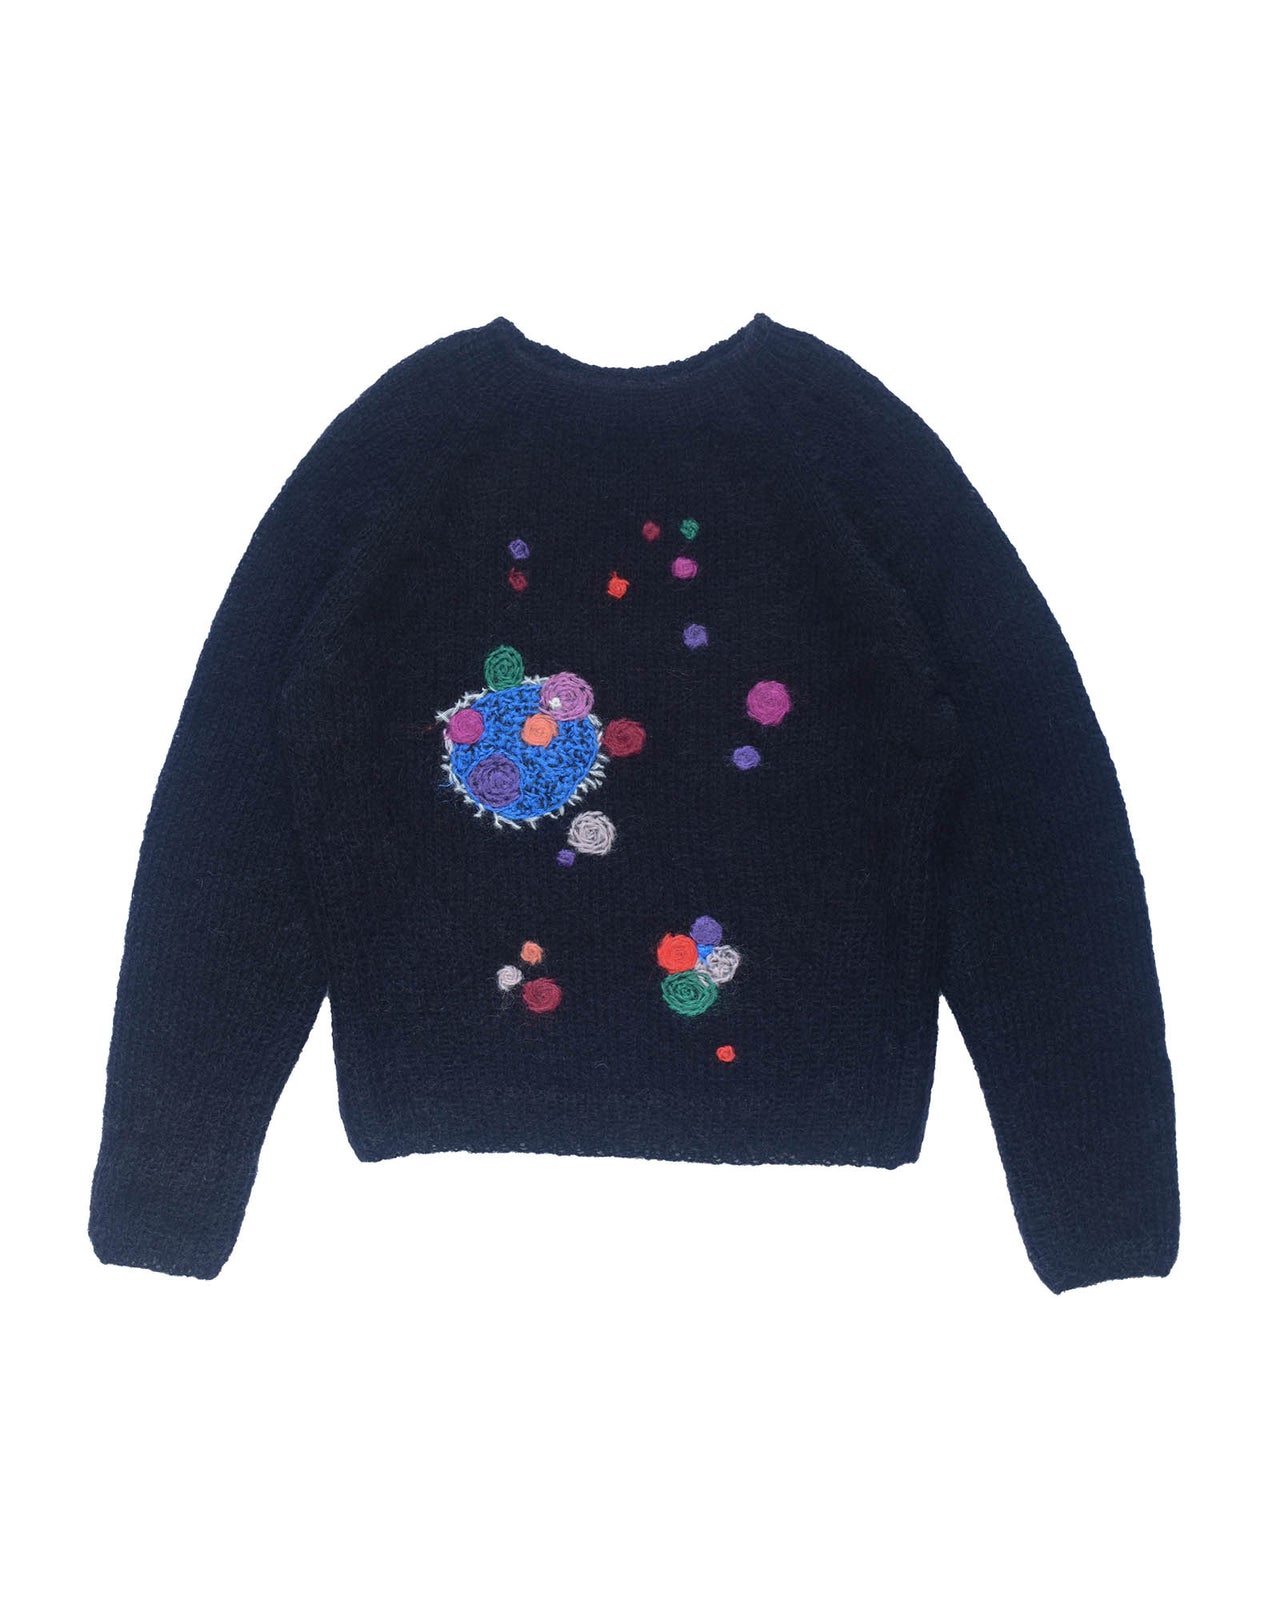 Black mohair sweater laid flat on white background. The sweater is adorned with colourful abstract star-like embroideries.